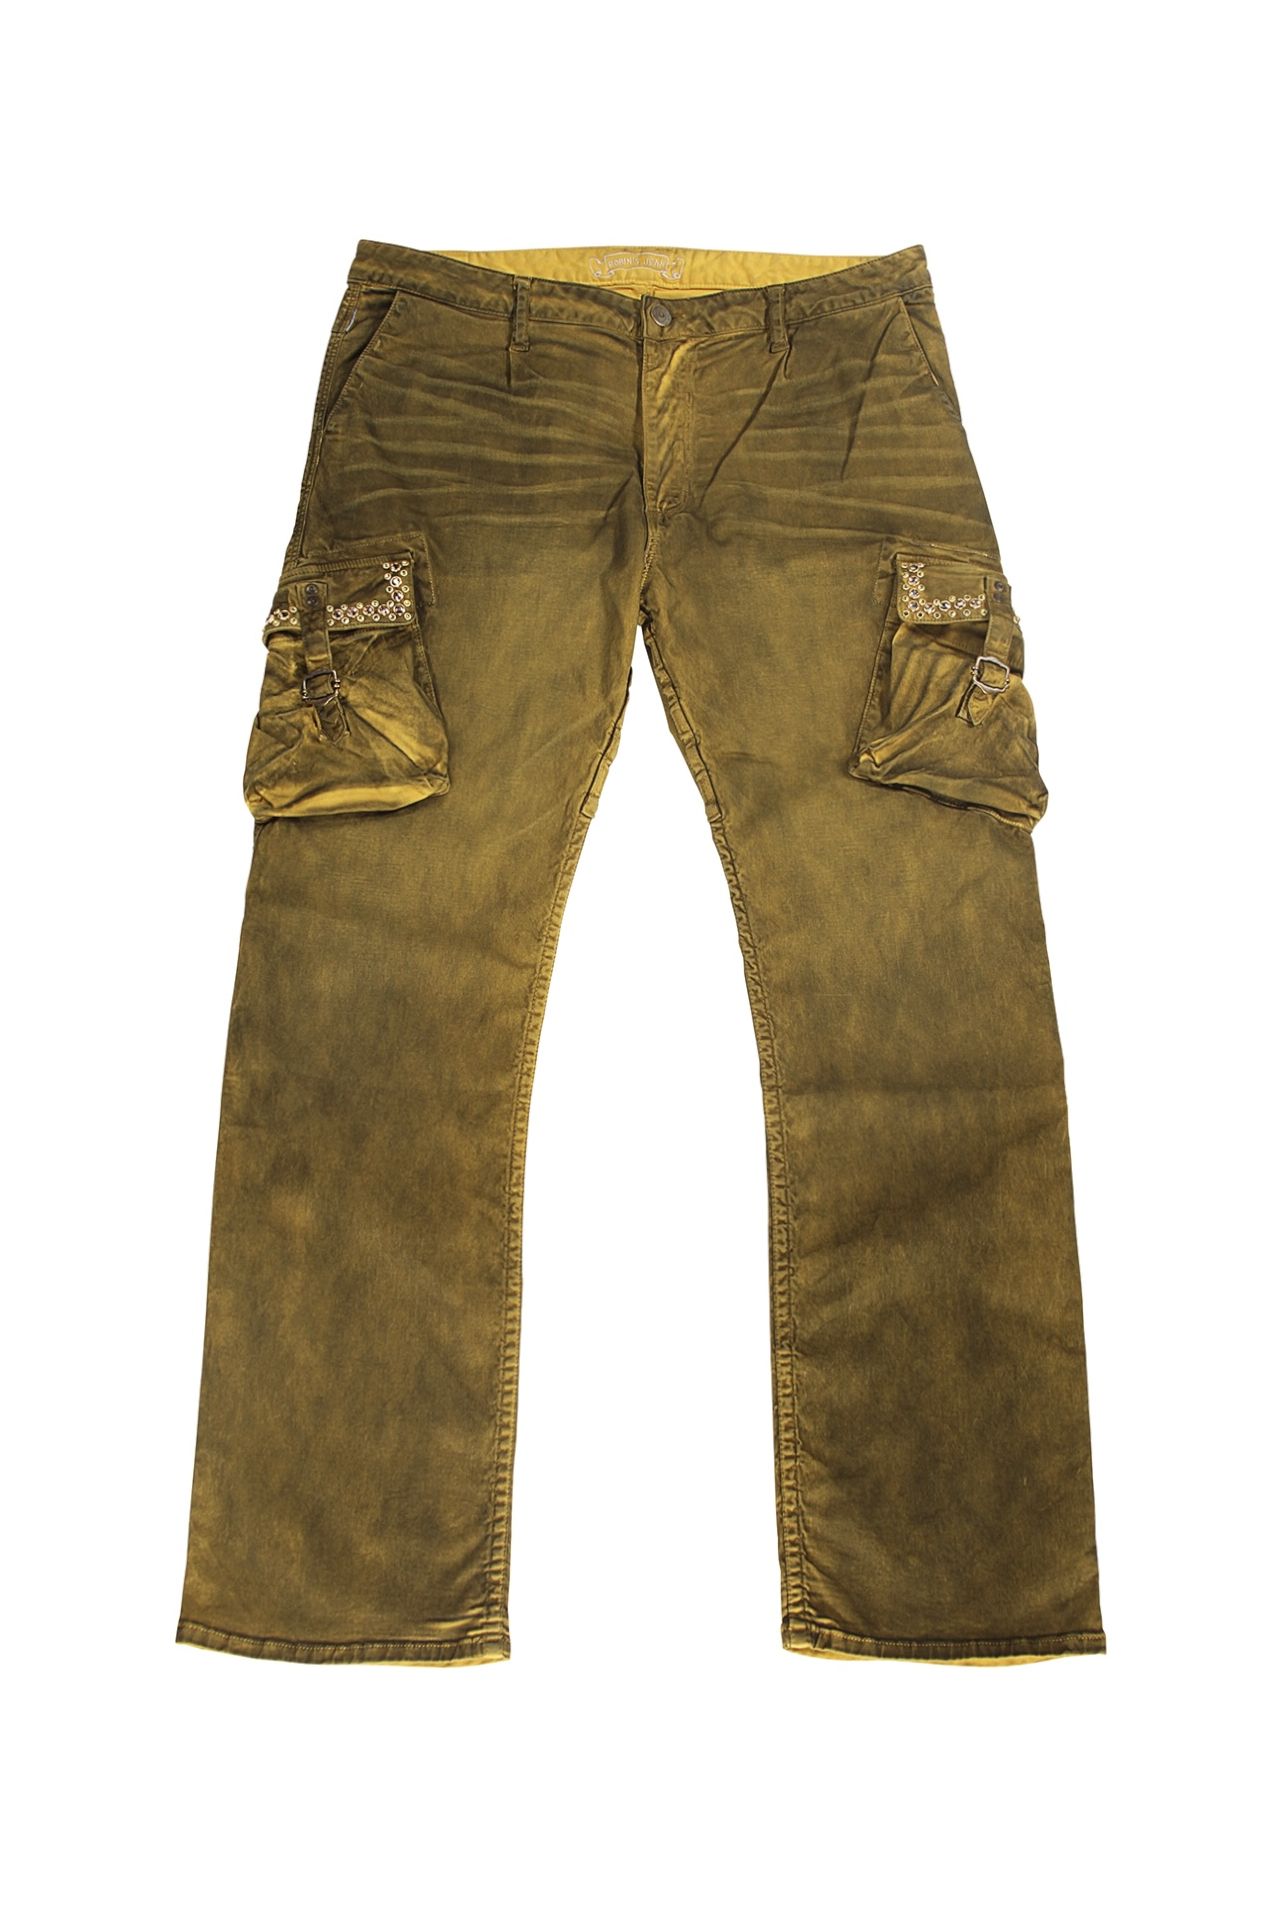 TRENCHES CARGO IN DUSTY YELLOW